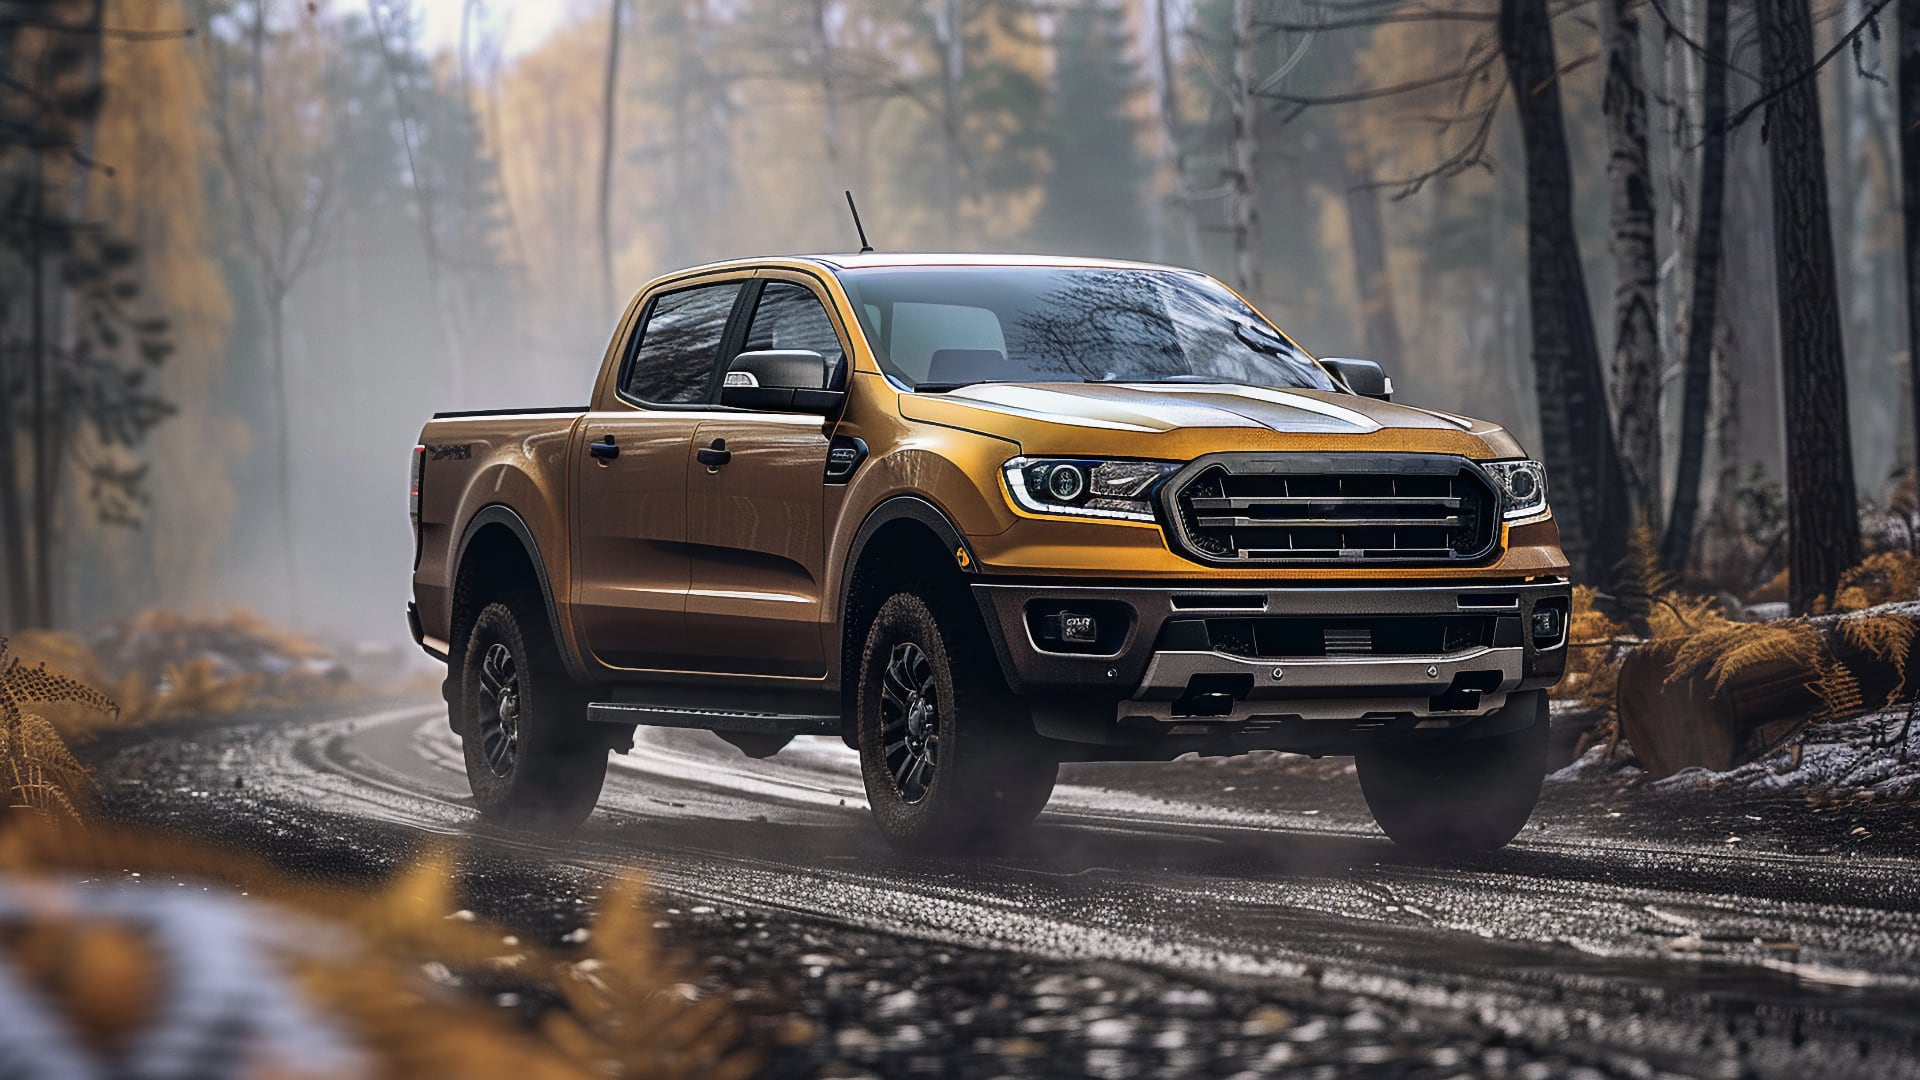 The 2019 Ford Ranger Raptor, a year to avoid, is driving down a dirt road.